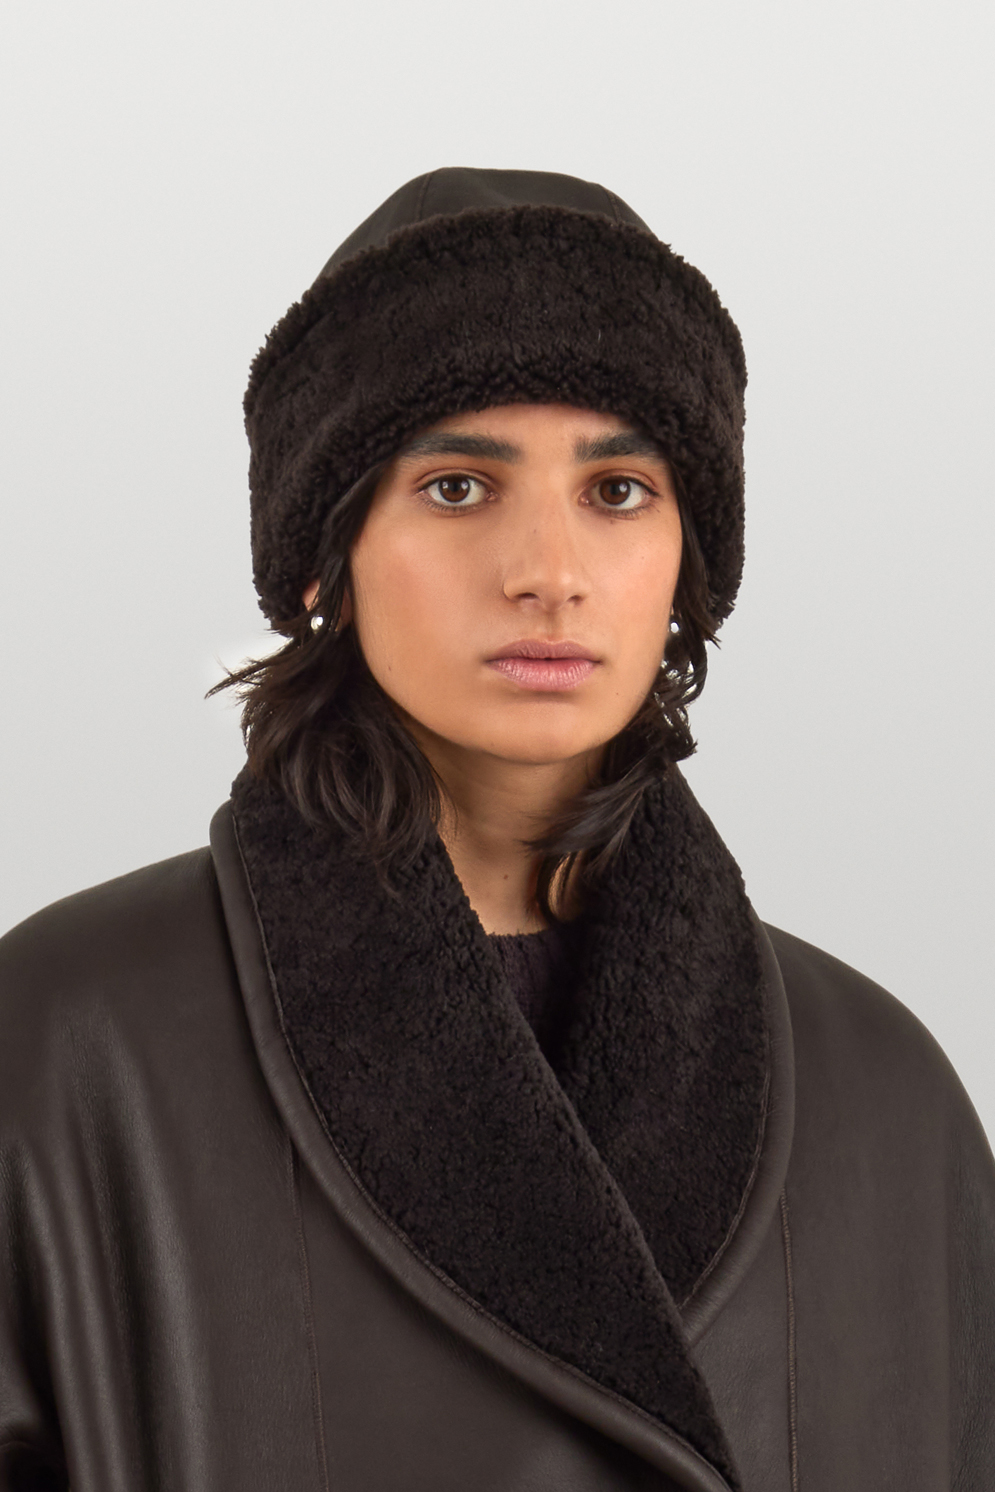 The Chiswick Shearling Hat